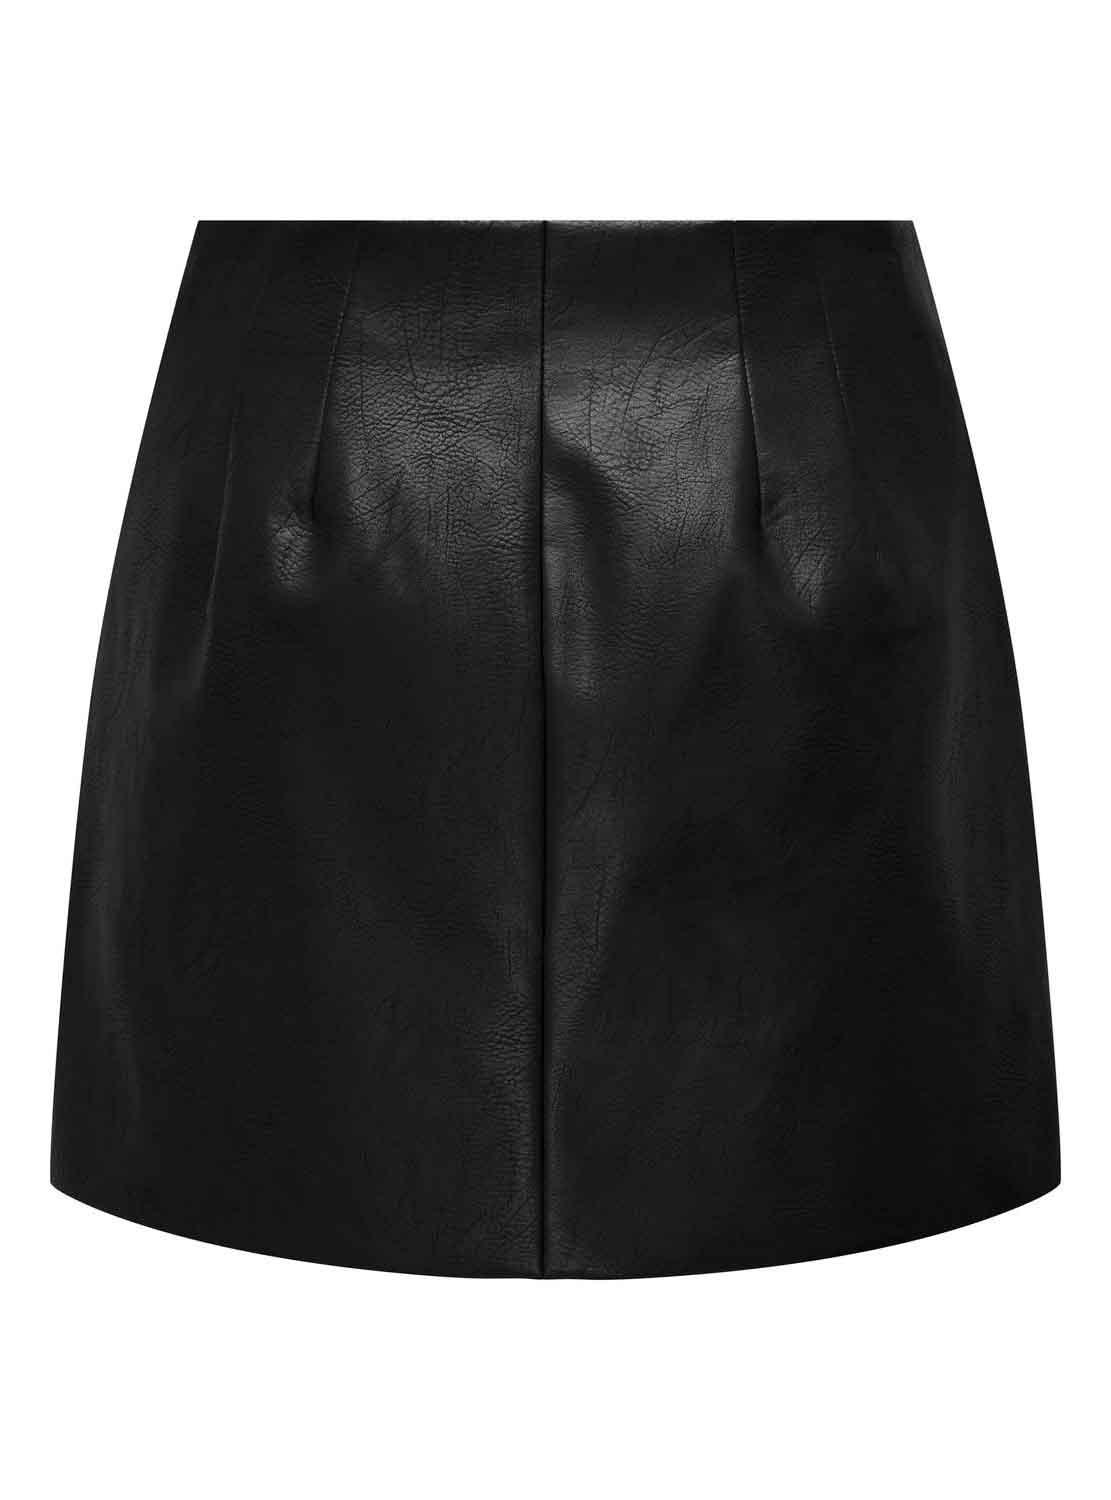 Gonna Only Sì Faux Leather Nero per Donna